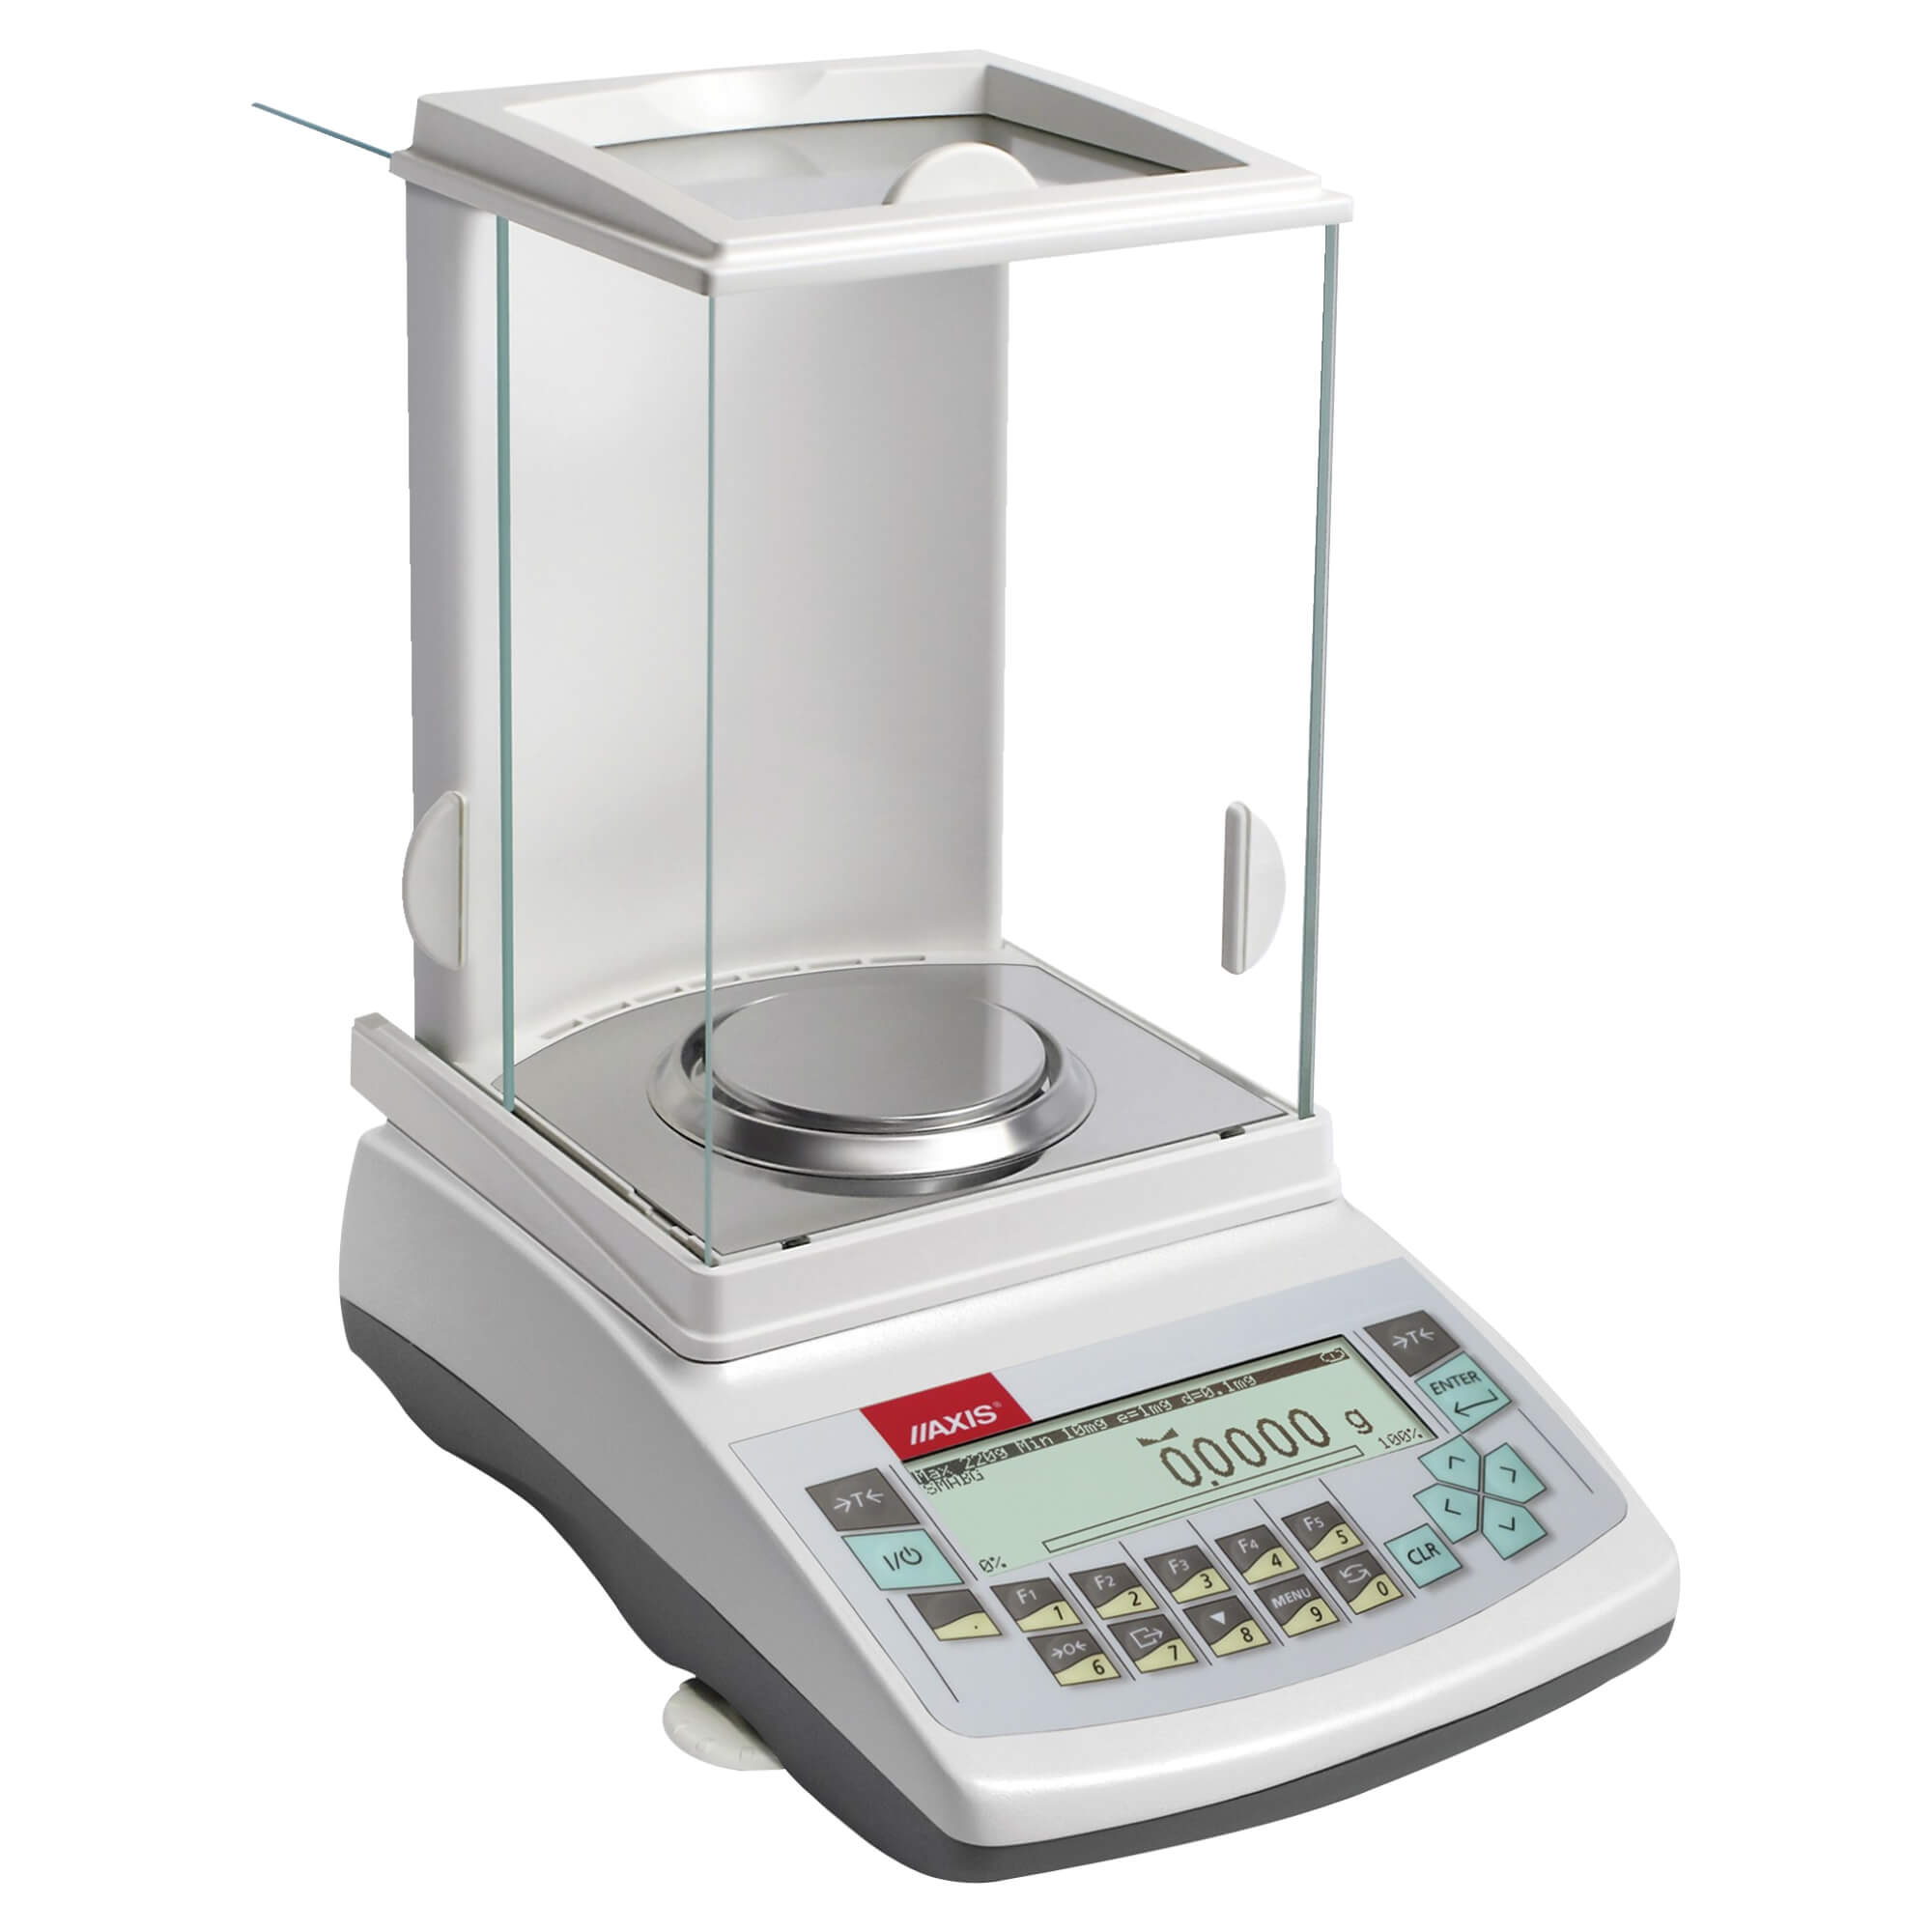 Analytical Electronics Balance Manufacturer in India